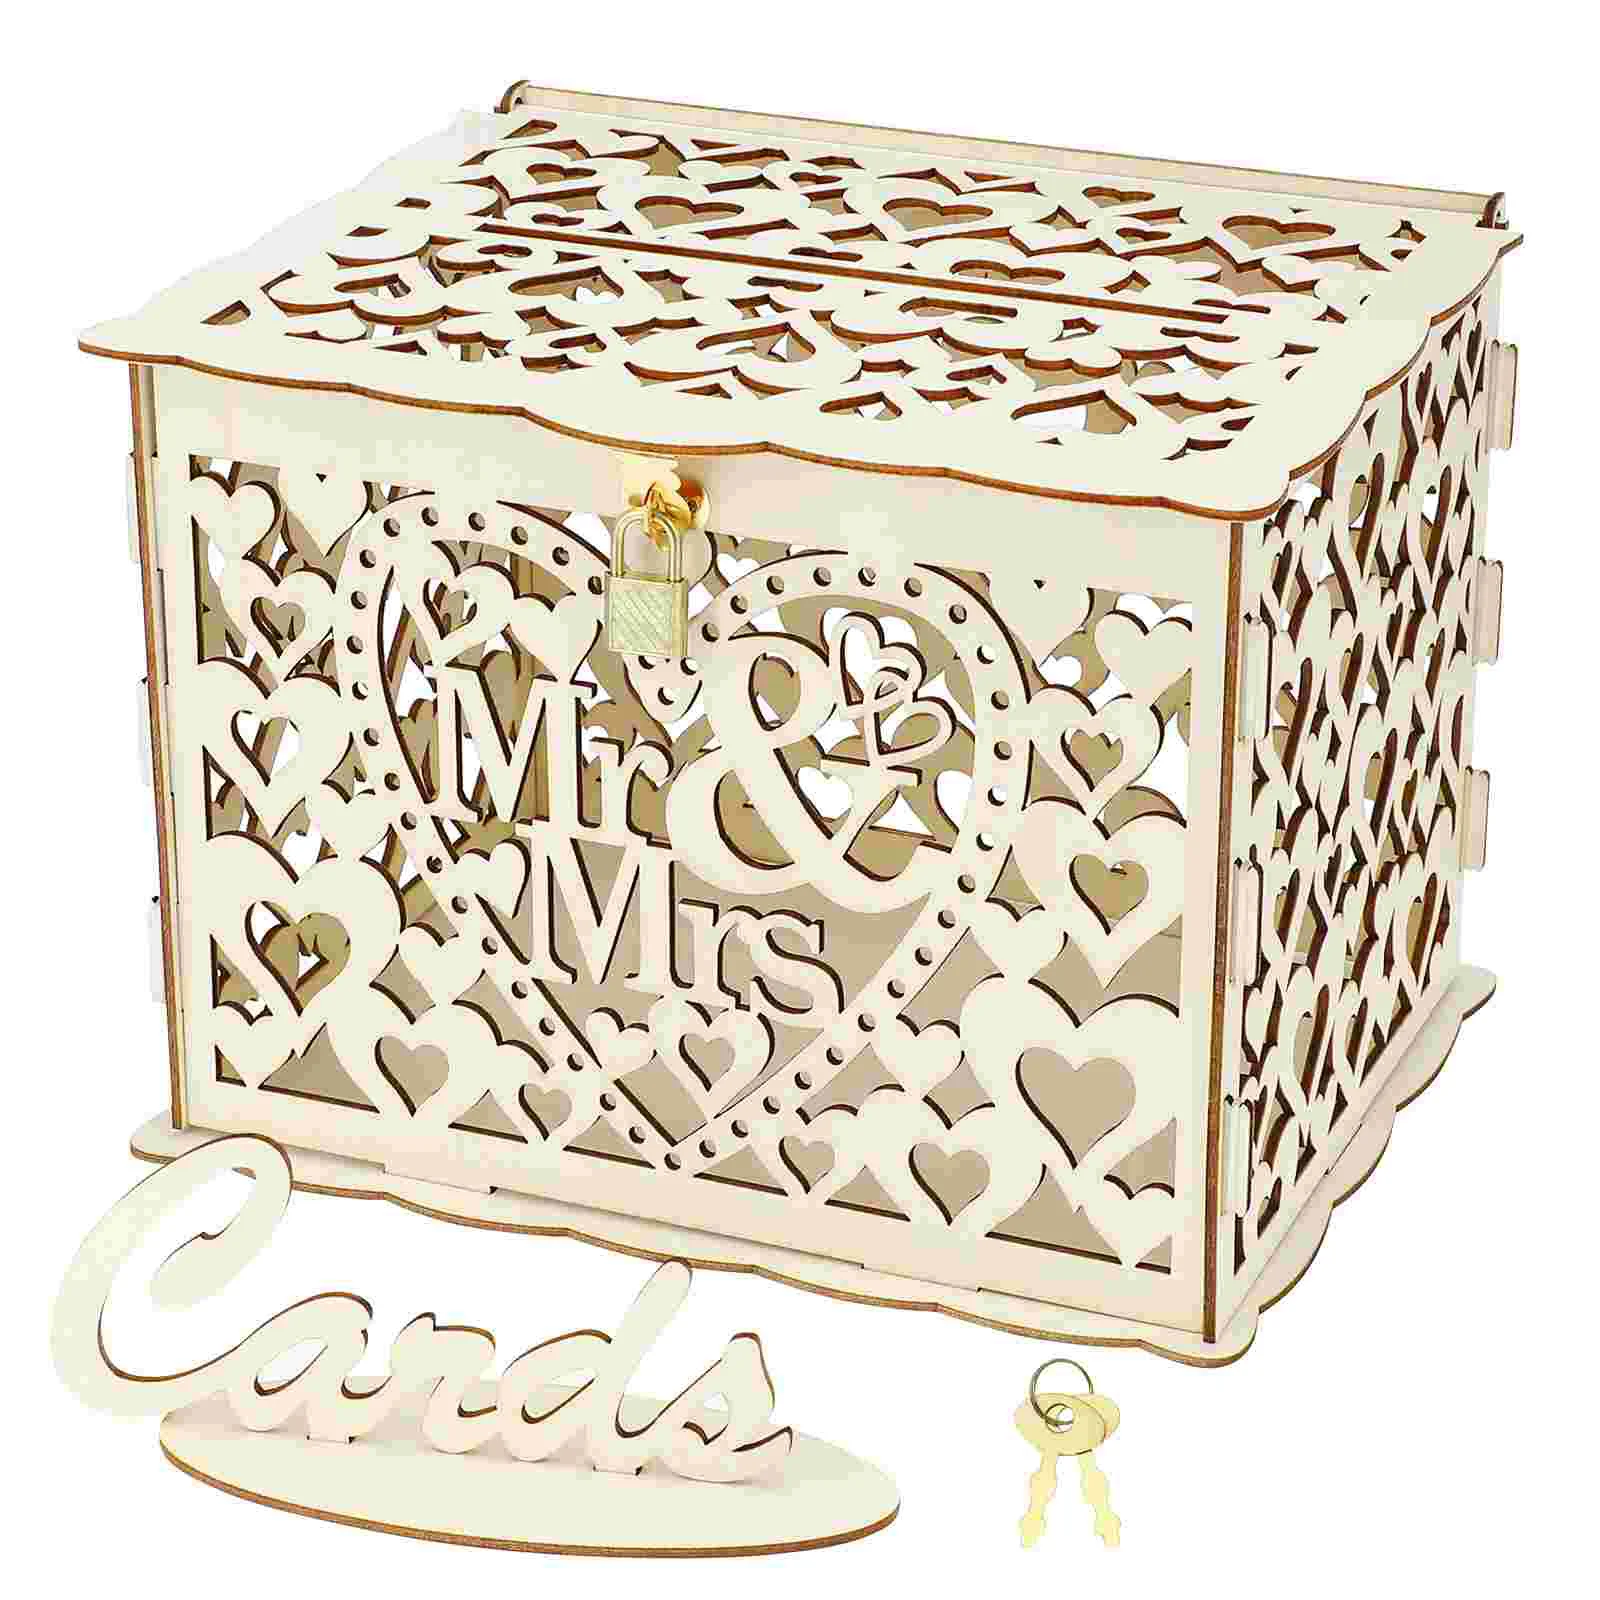 

Wedding Box With Lock And Slot DIY Rustic Wood Box Gift Holder Box For Weddings Showers Birthdays Party